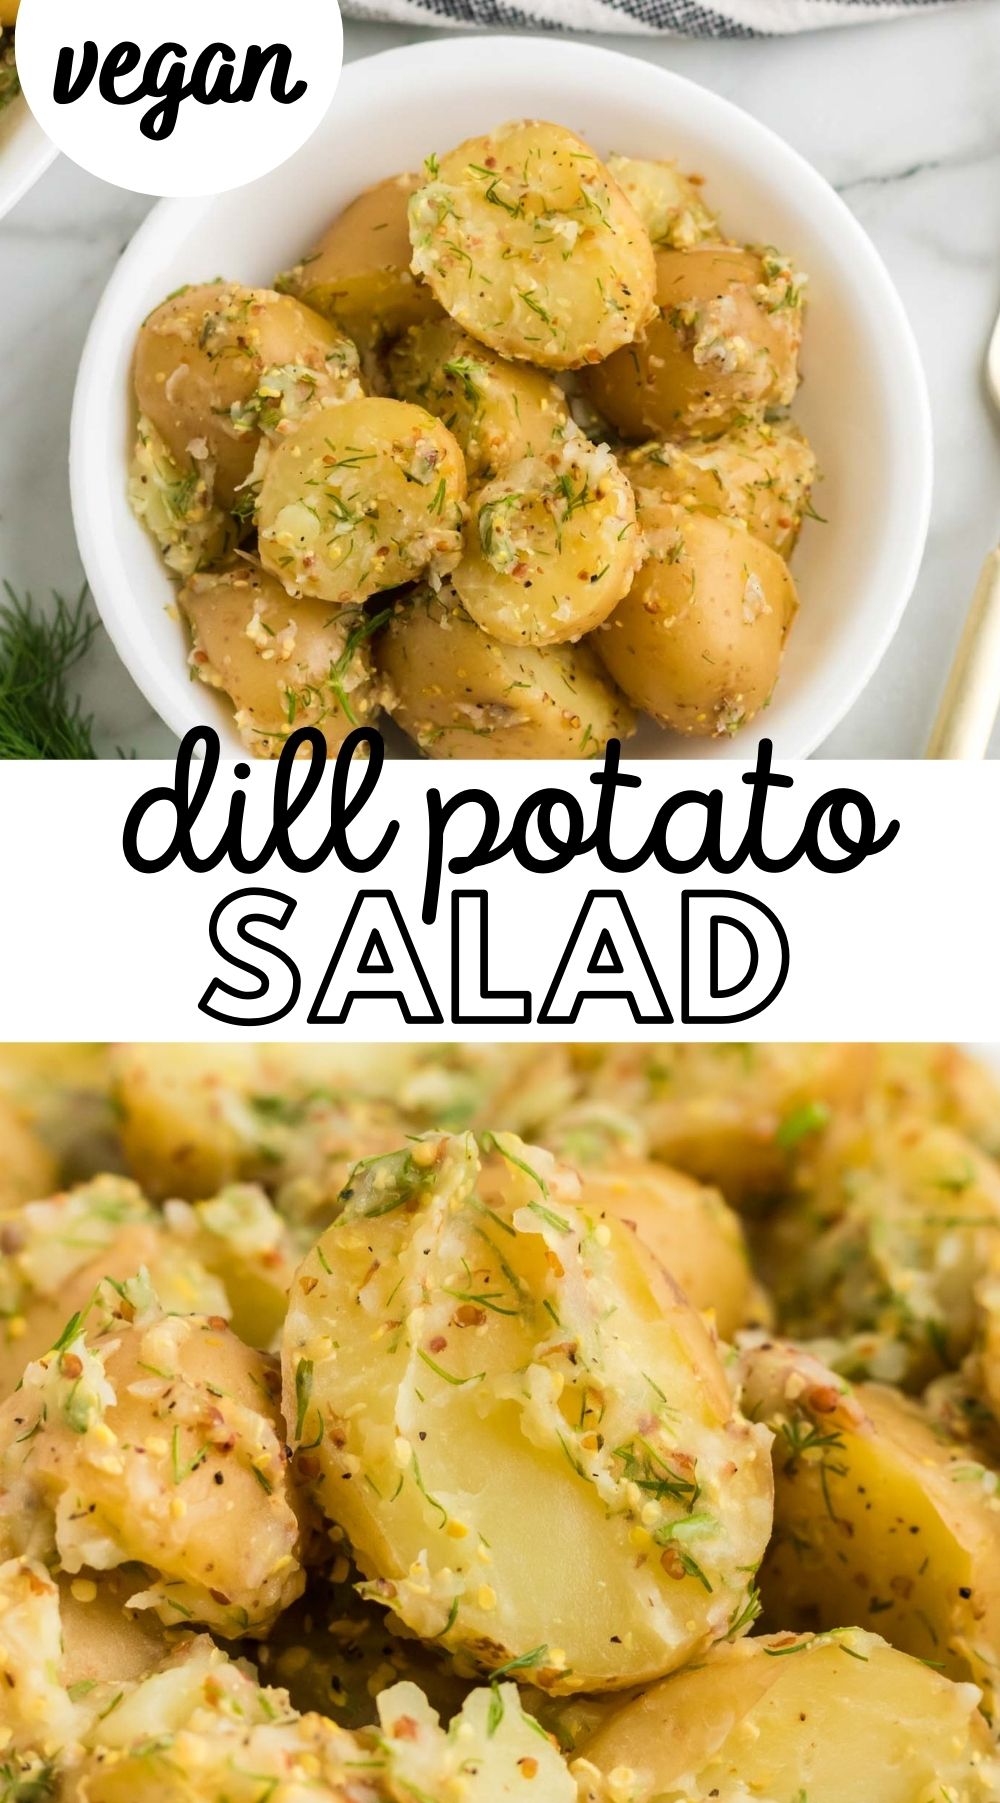 Two different images of a dill dijon potato salad in a bowl with text overlay reading "dill potato salad".